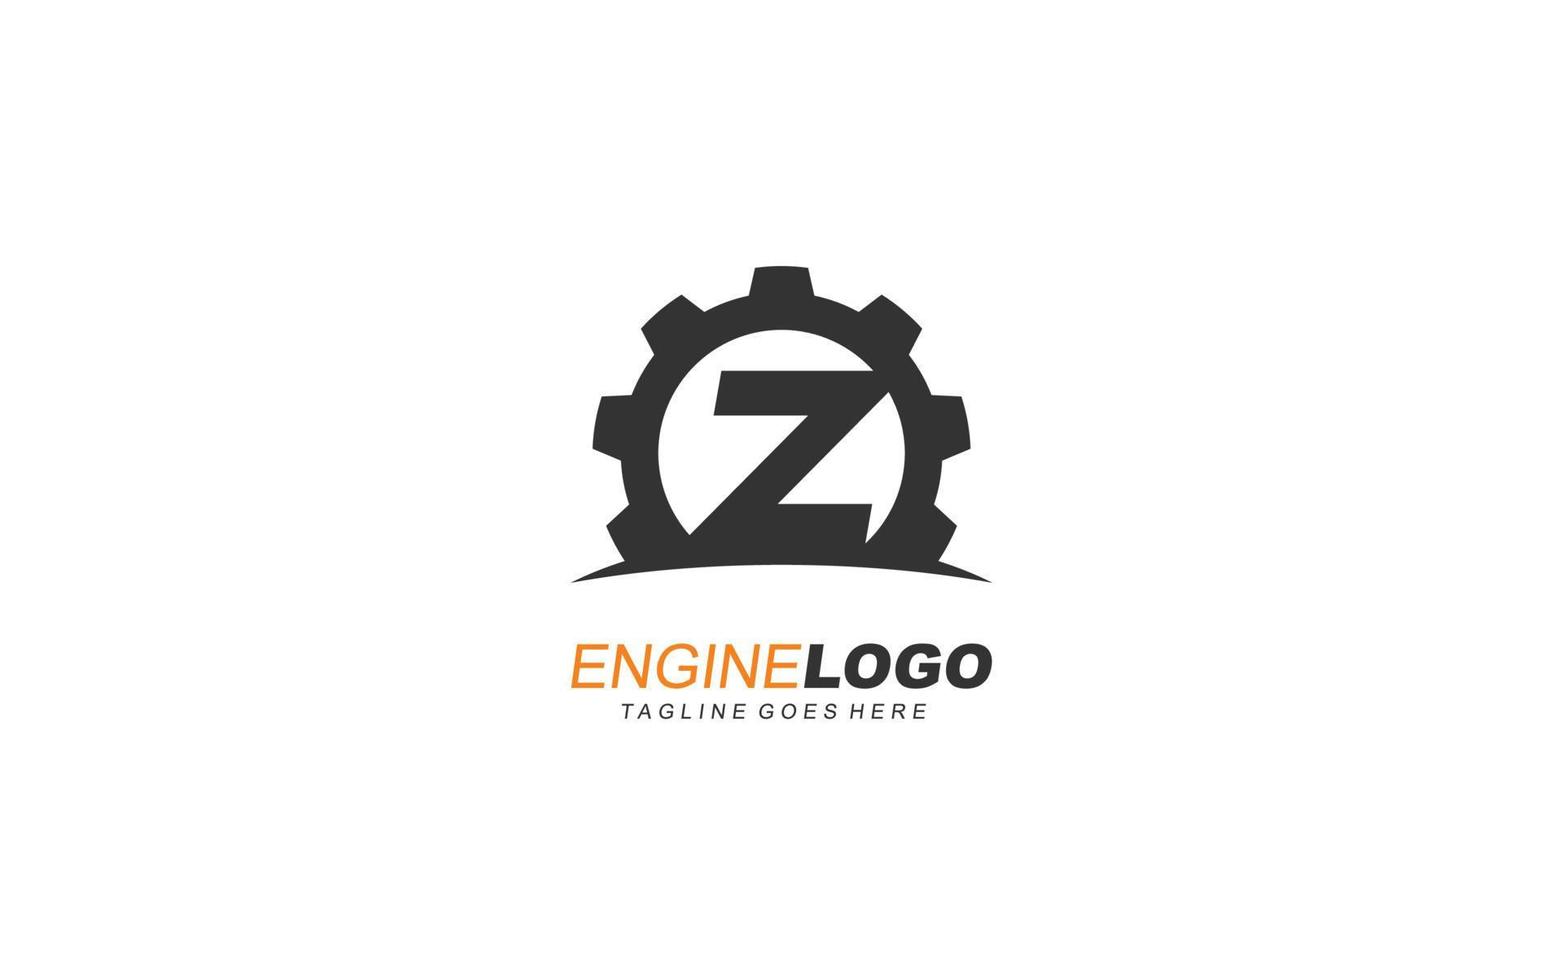 Z logo gear for identity. industrial template vector illustration for your brand.